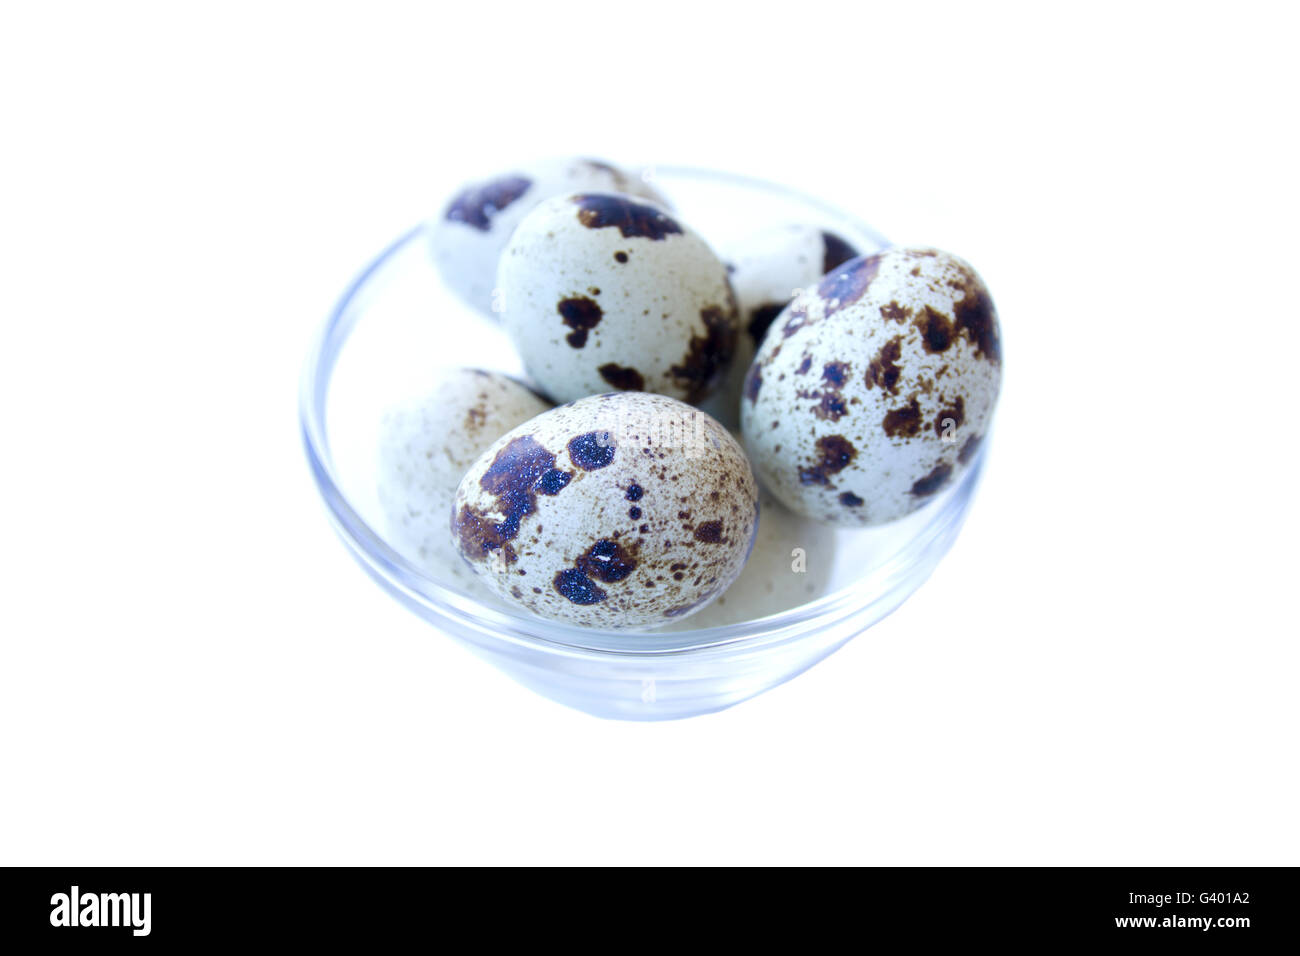 Bowl with quail eggs on a white background Stock Photo